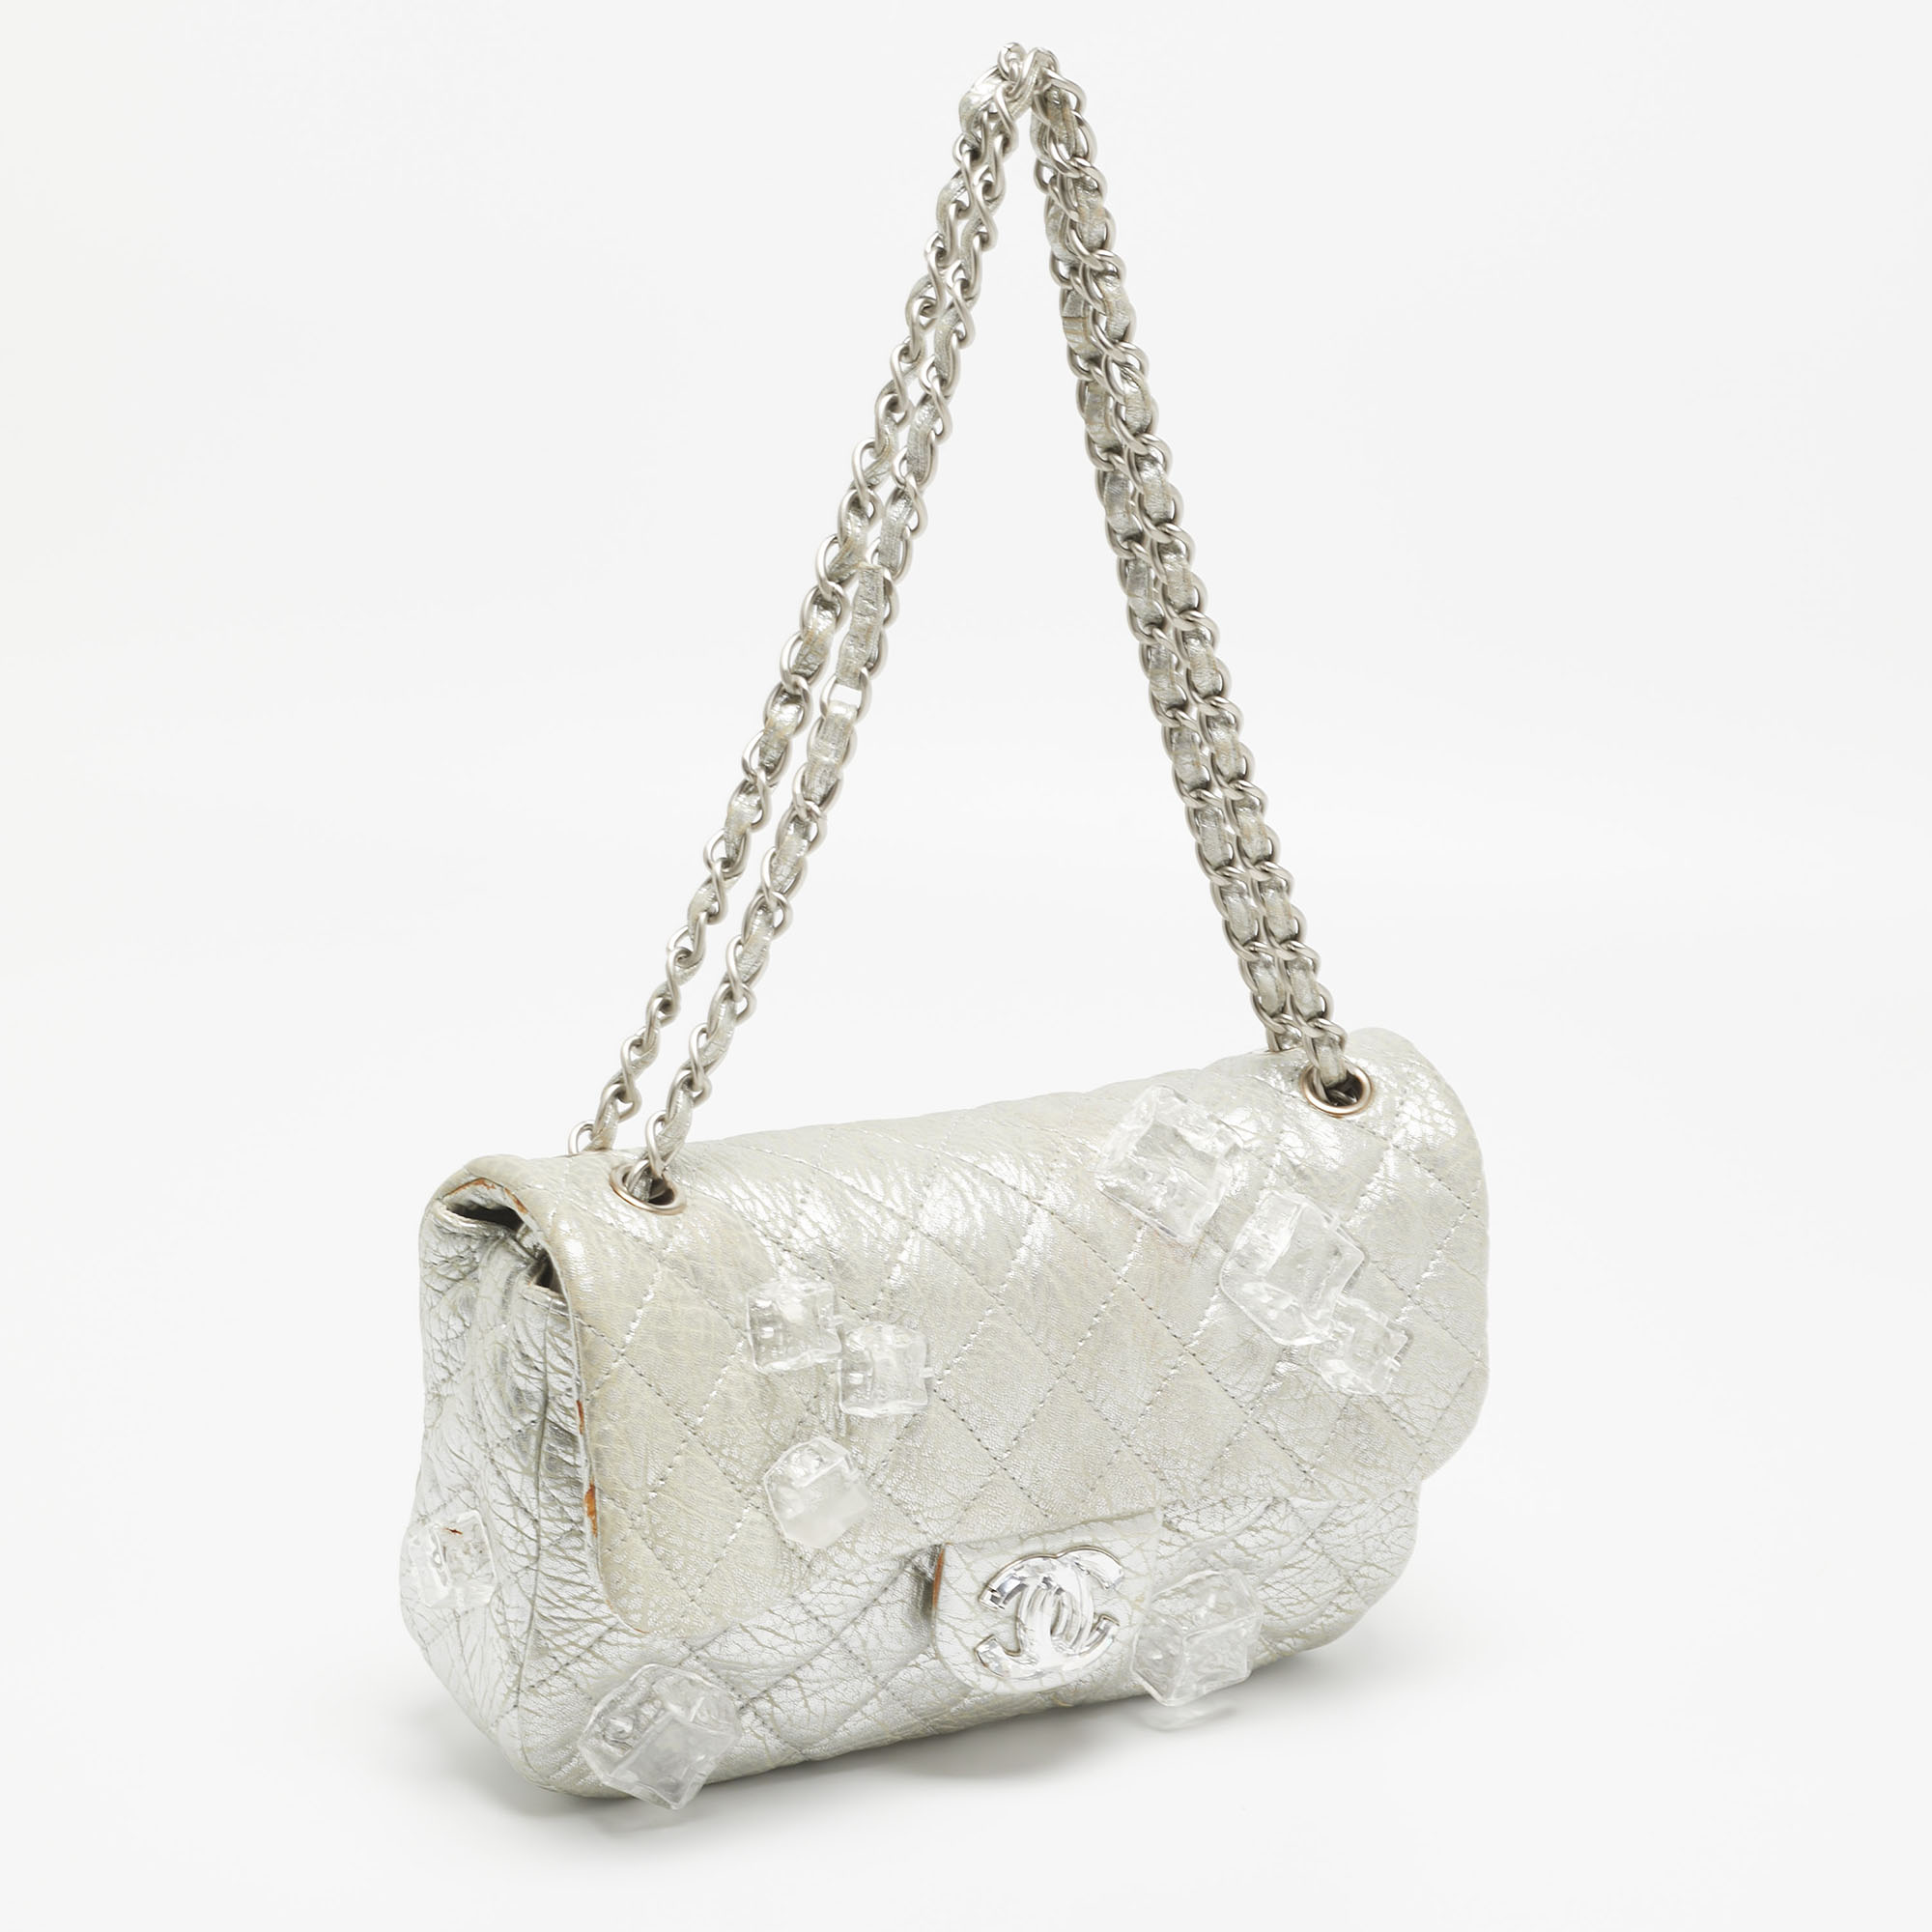 Chanel Silver Quilted Leather Medium Classic Flap Shoulder Bag